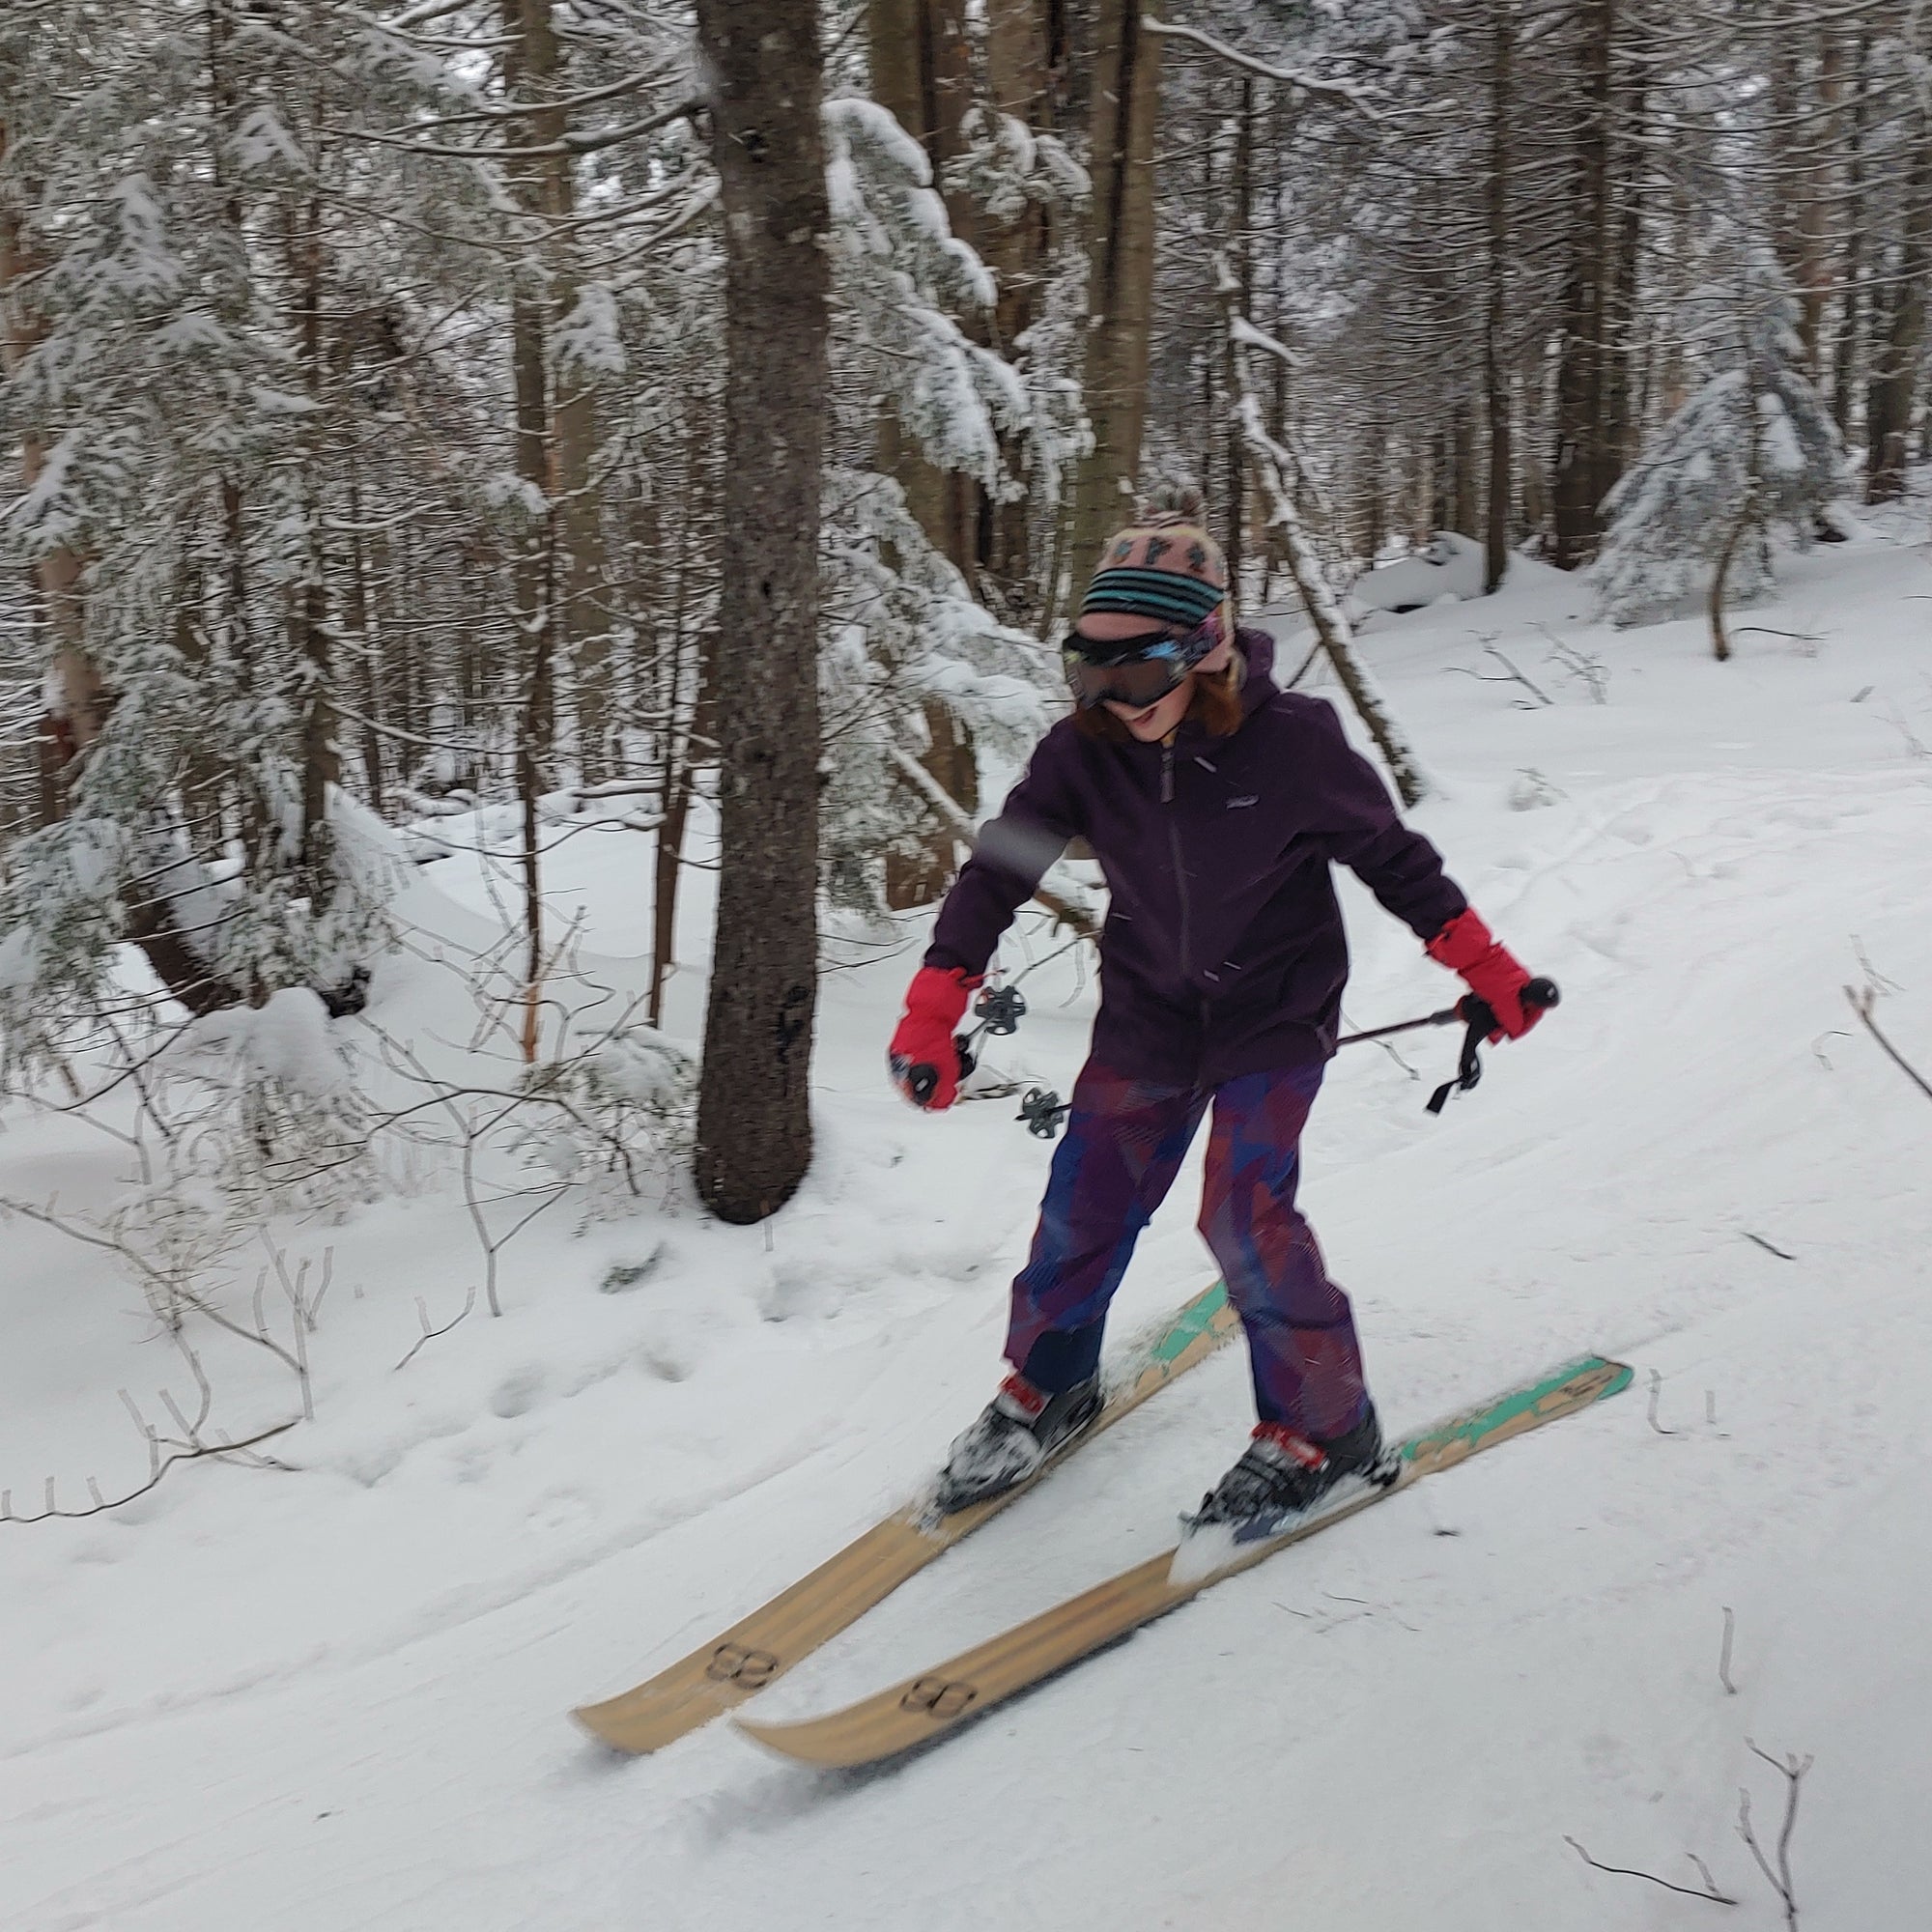 A skier in a purple jacket and pink mittens skiing downhill through the woods on altai skis